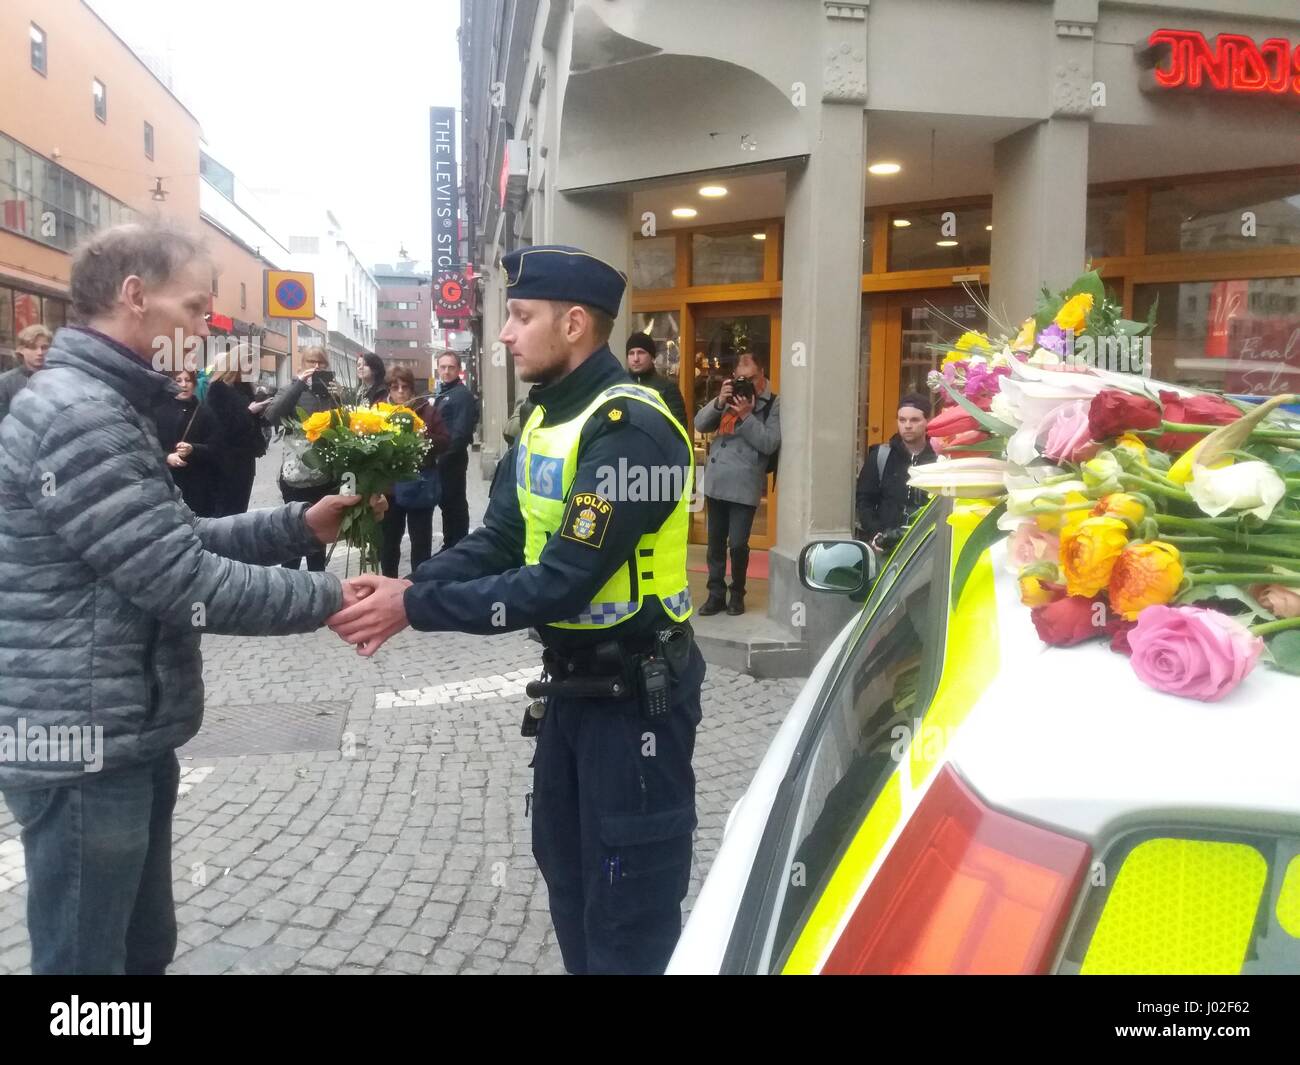 Swedish citizen expresses his condolences by giving a bouquet of flowers to a (Polis) police officer sitting in front of a parked police car covered by flowers deposited by pedestrians in memory to the victiims of the terrorist truck attack in the center of Stockholm's  city centre. Stock Photo